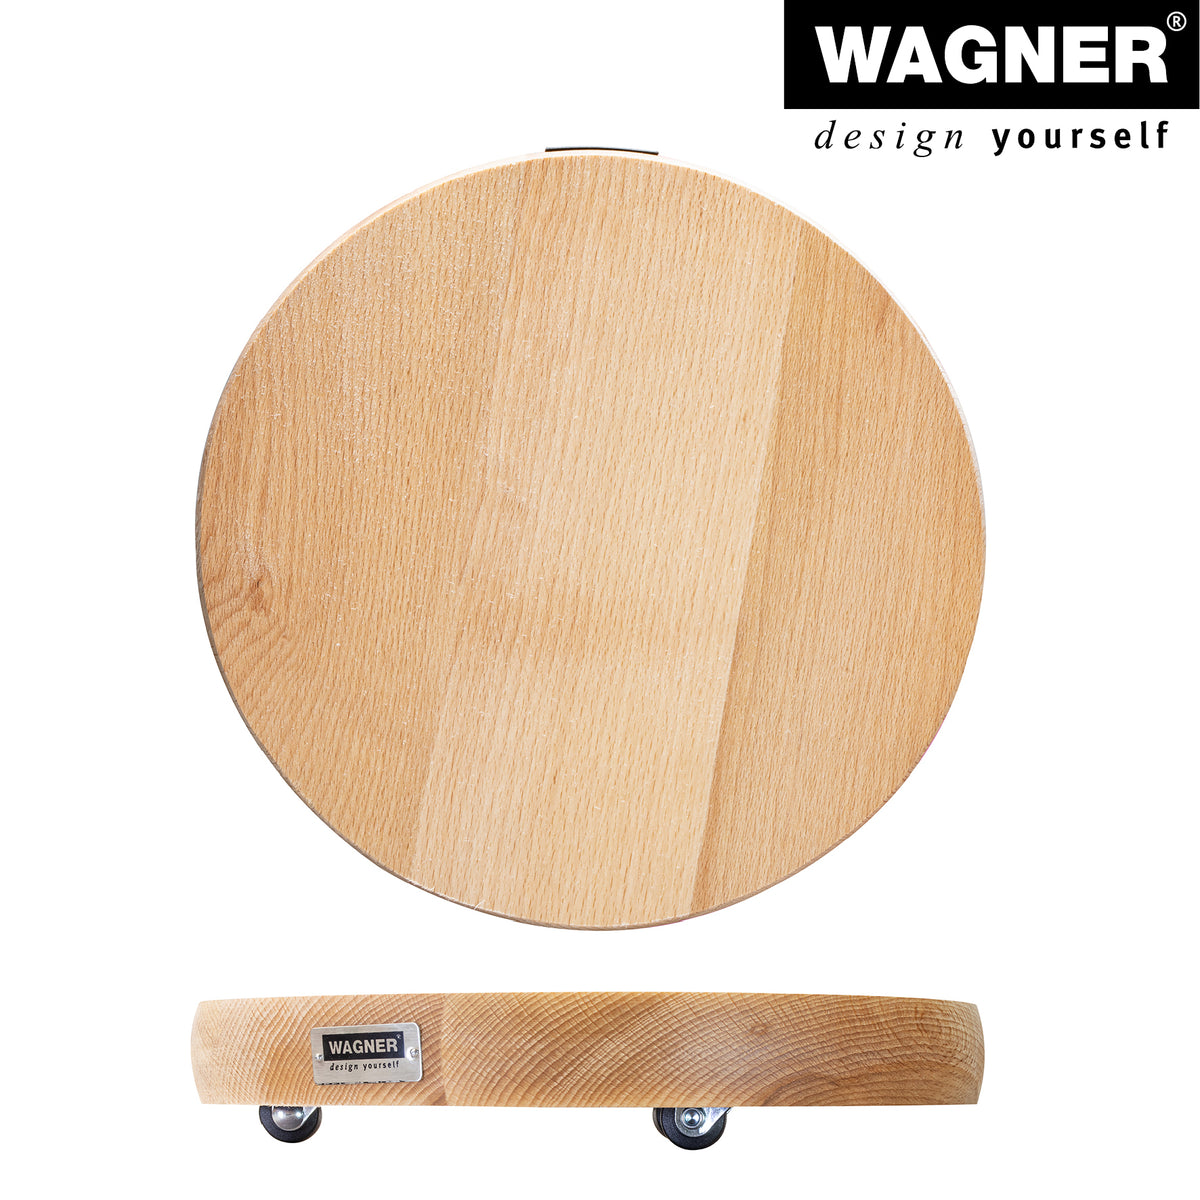 10&quot; natural round wooden plant caddy w/no-show casters. Made from beech wood. 220 lbs. capacity. 9.6&quot;D x 1.8&quot;H 2.3 lbs.